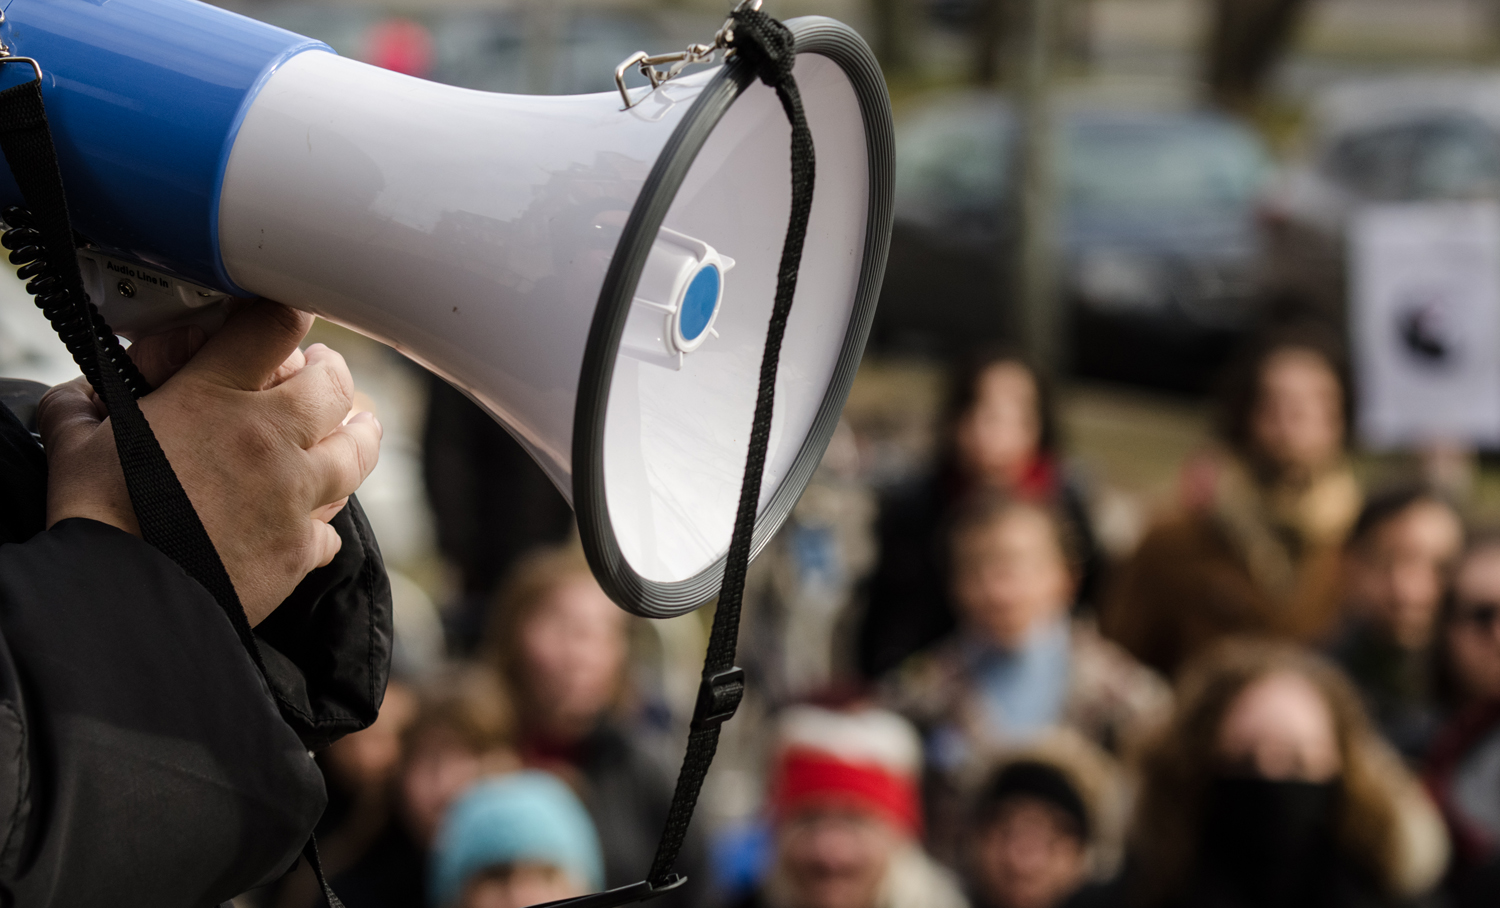 A hand holding a megaphone in front of a blurred background of people at a rally or protest.